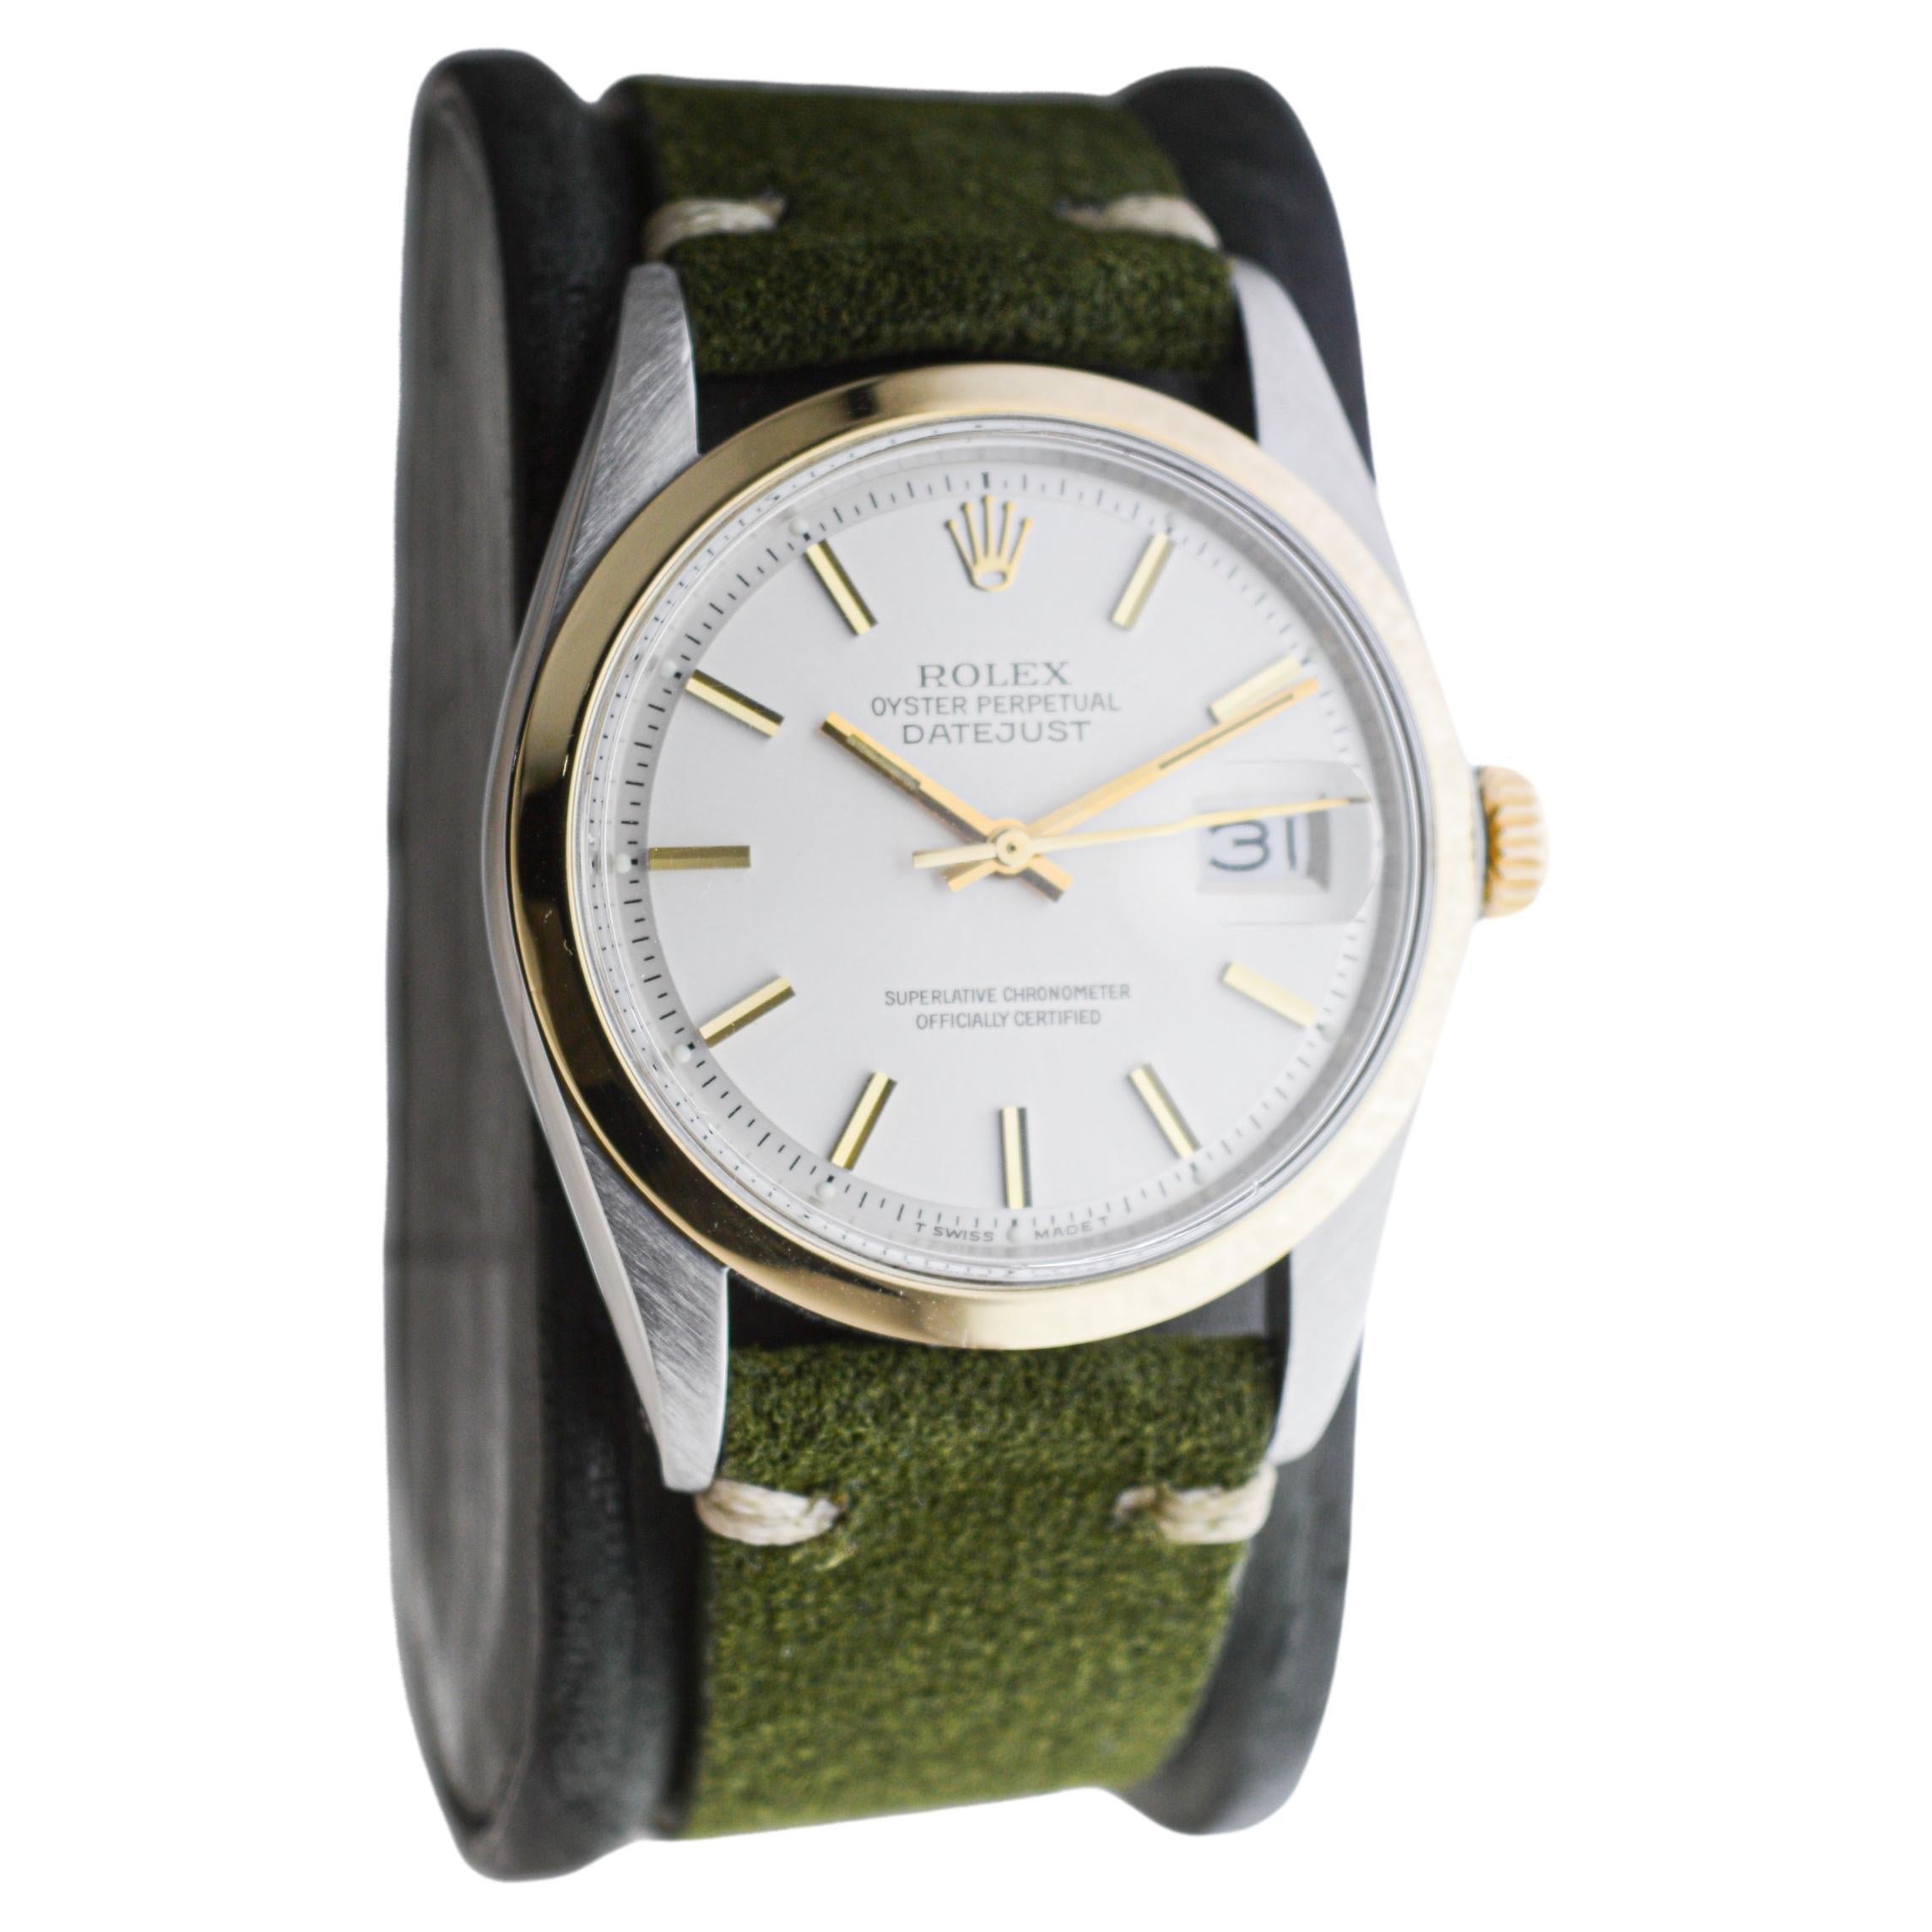 FACTORY / HOUSE: Rolex Watch Company
STYLE / REFERENCE: Oyster Perpetual Datejust / Reference 1600
METAL / MATERIAL: Stainless Steel and 14Kt. Solid Gold 
CIRCA / YEAR: 1971
DIMENSIONS / SIZE: Length 42mm X Diameter 36mm
MOVEMENT / CALIBER: